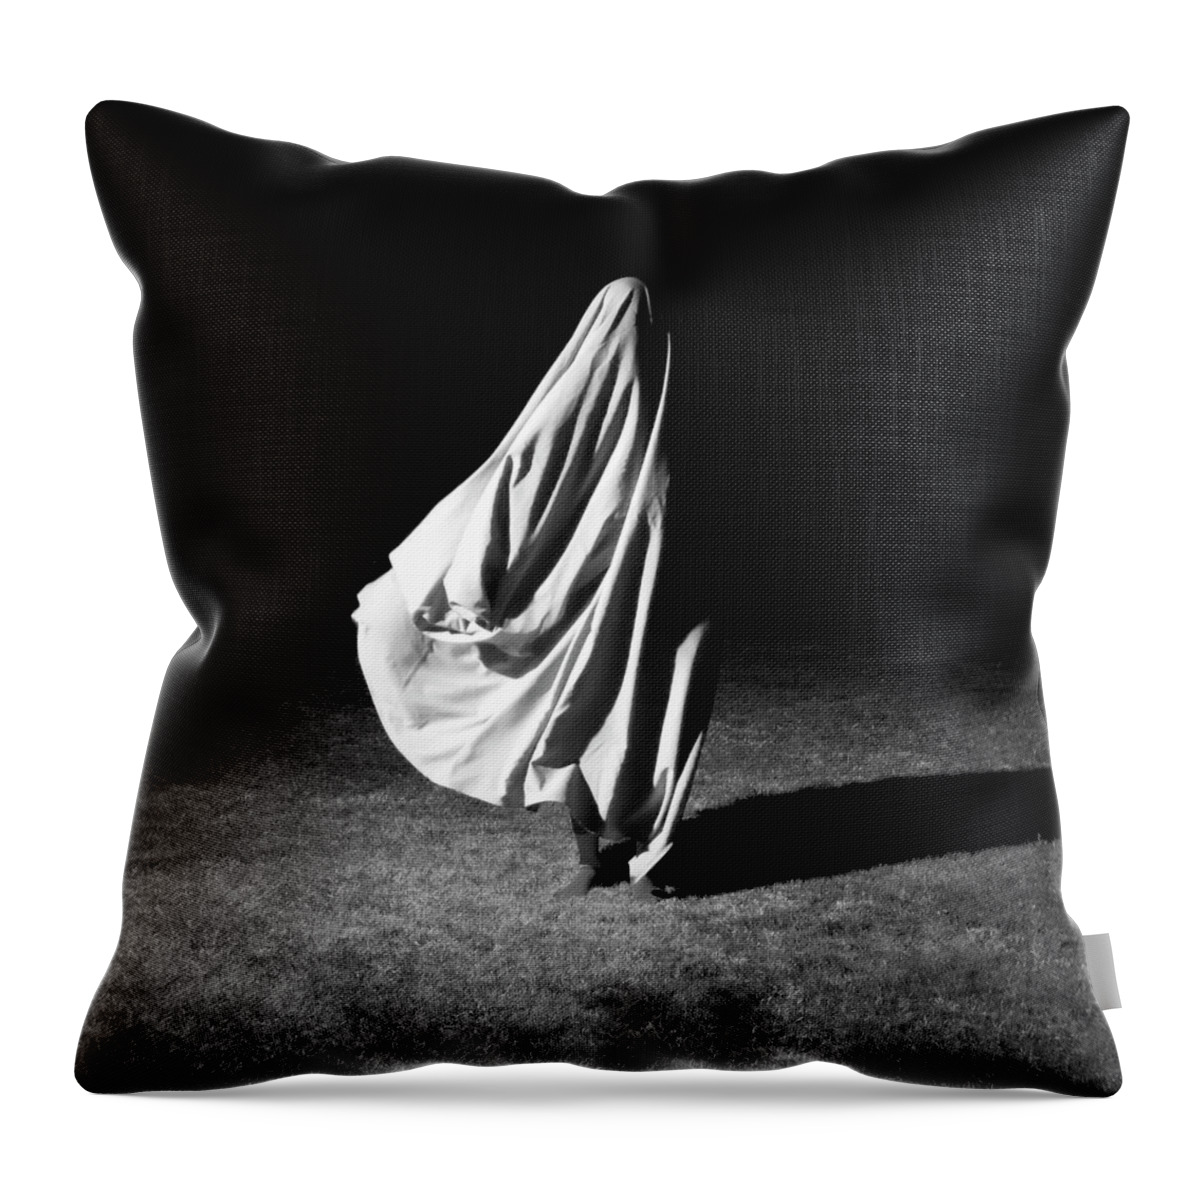 Shadow Throw Pillow featuring the photograph Poem Of A Dead Song by Lauralani